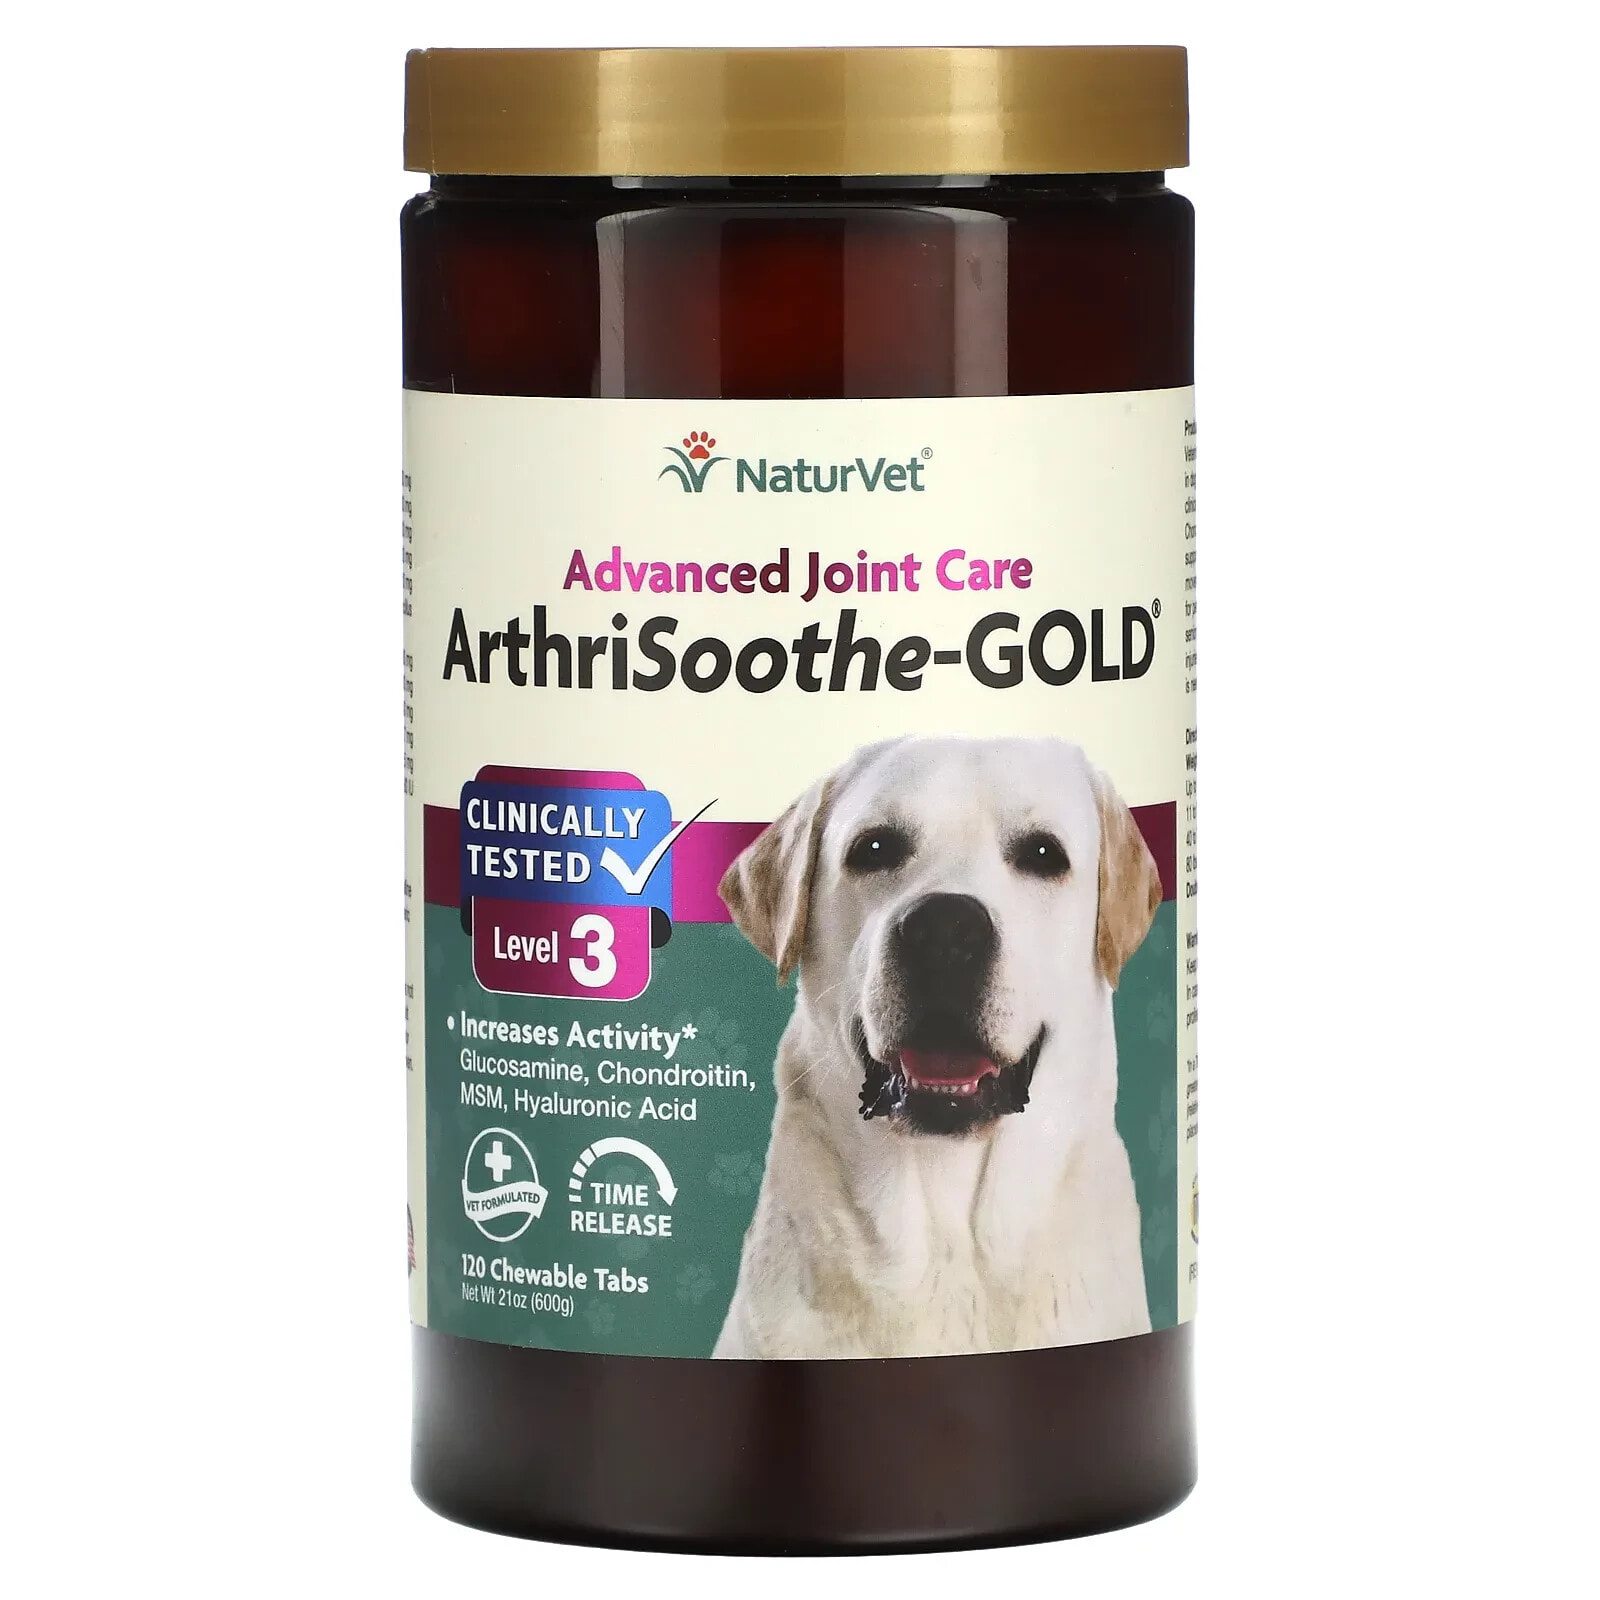 ArthriSoothe-GOLD, Advanced Joint Care, For Dogs & Cats, Level 3, 120 Chewable Tabs, 21 oz (600 g)